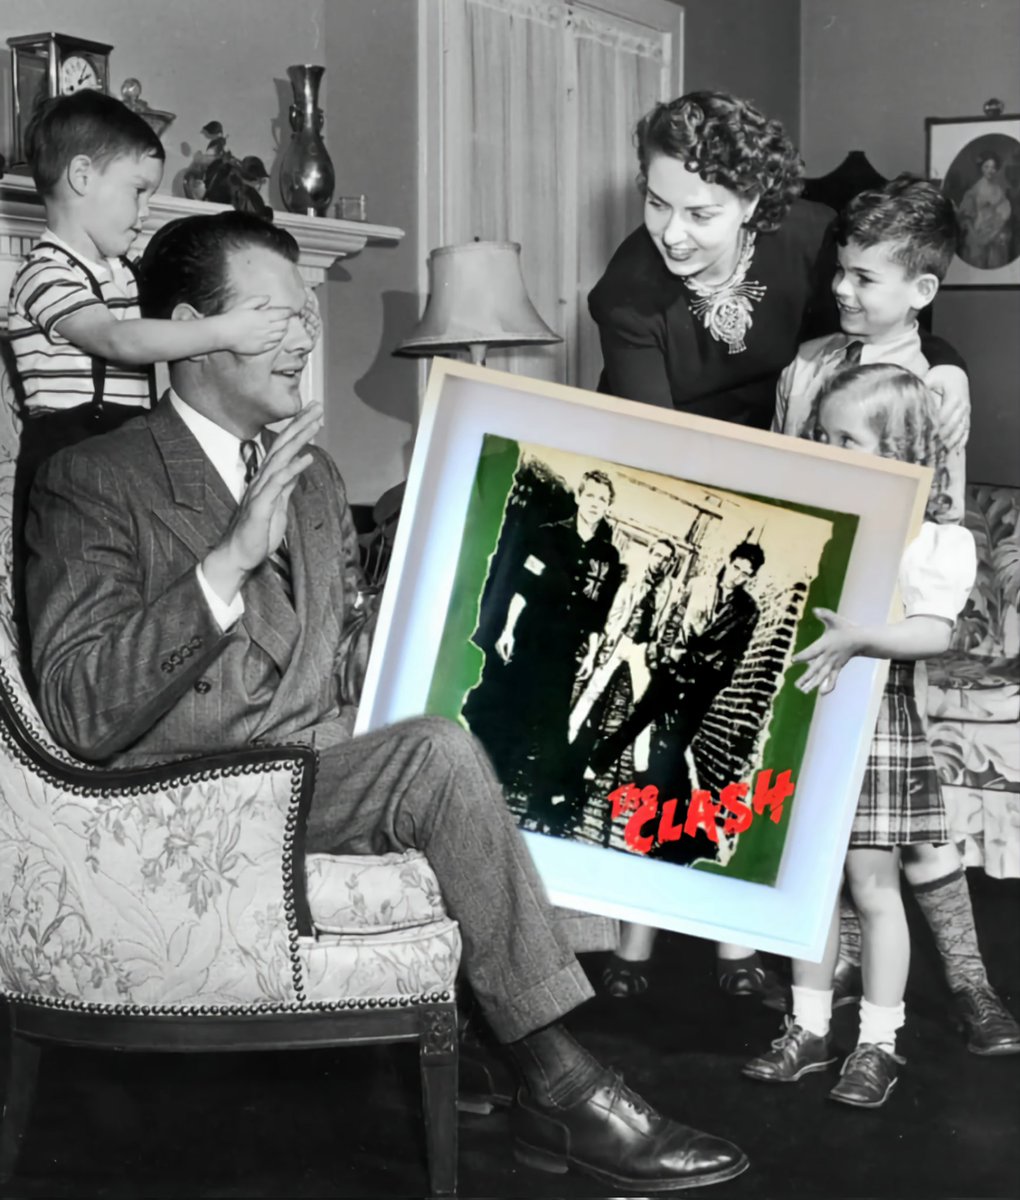 Happy Father's Day to all the dads!

Start hinting now to get 'em to give you a giant painting of your favourite album for next year!

#fathersday #fathersdaygifts #musiclover #recordcollector #vinylcollector #vinyllover #notonthehighstreet